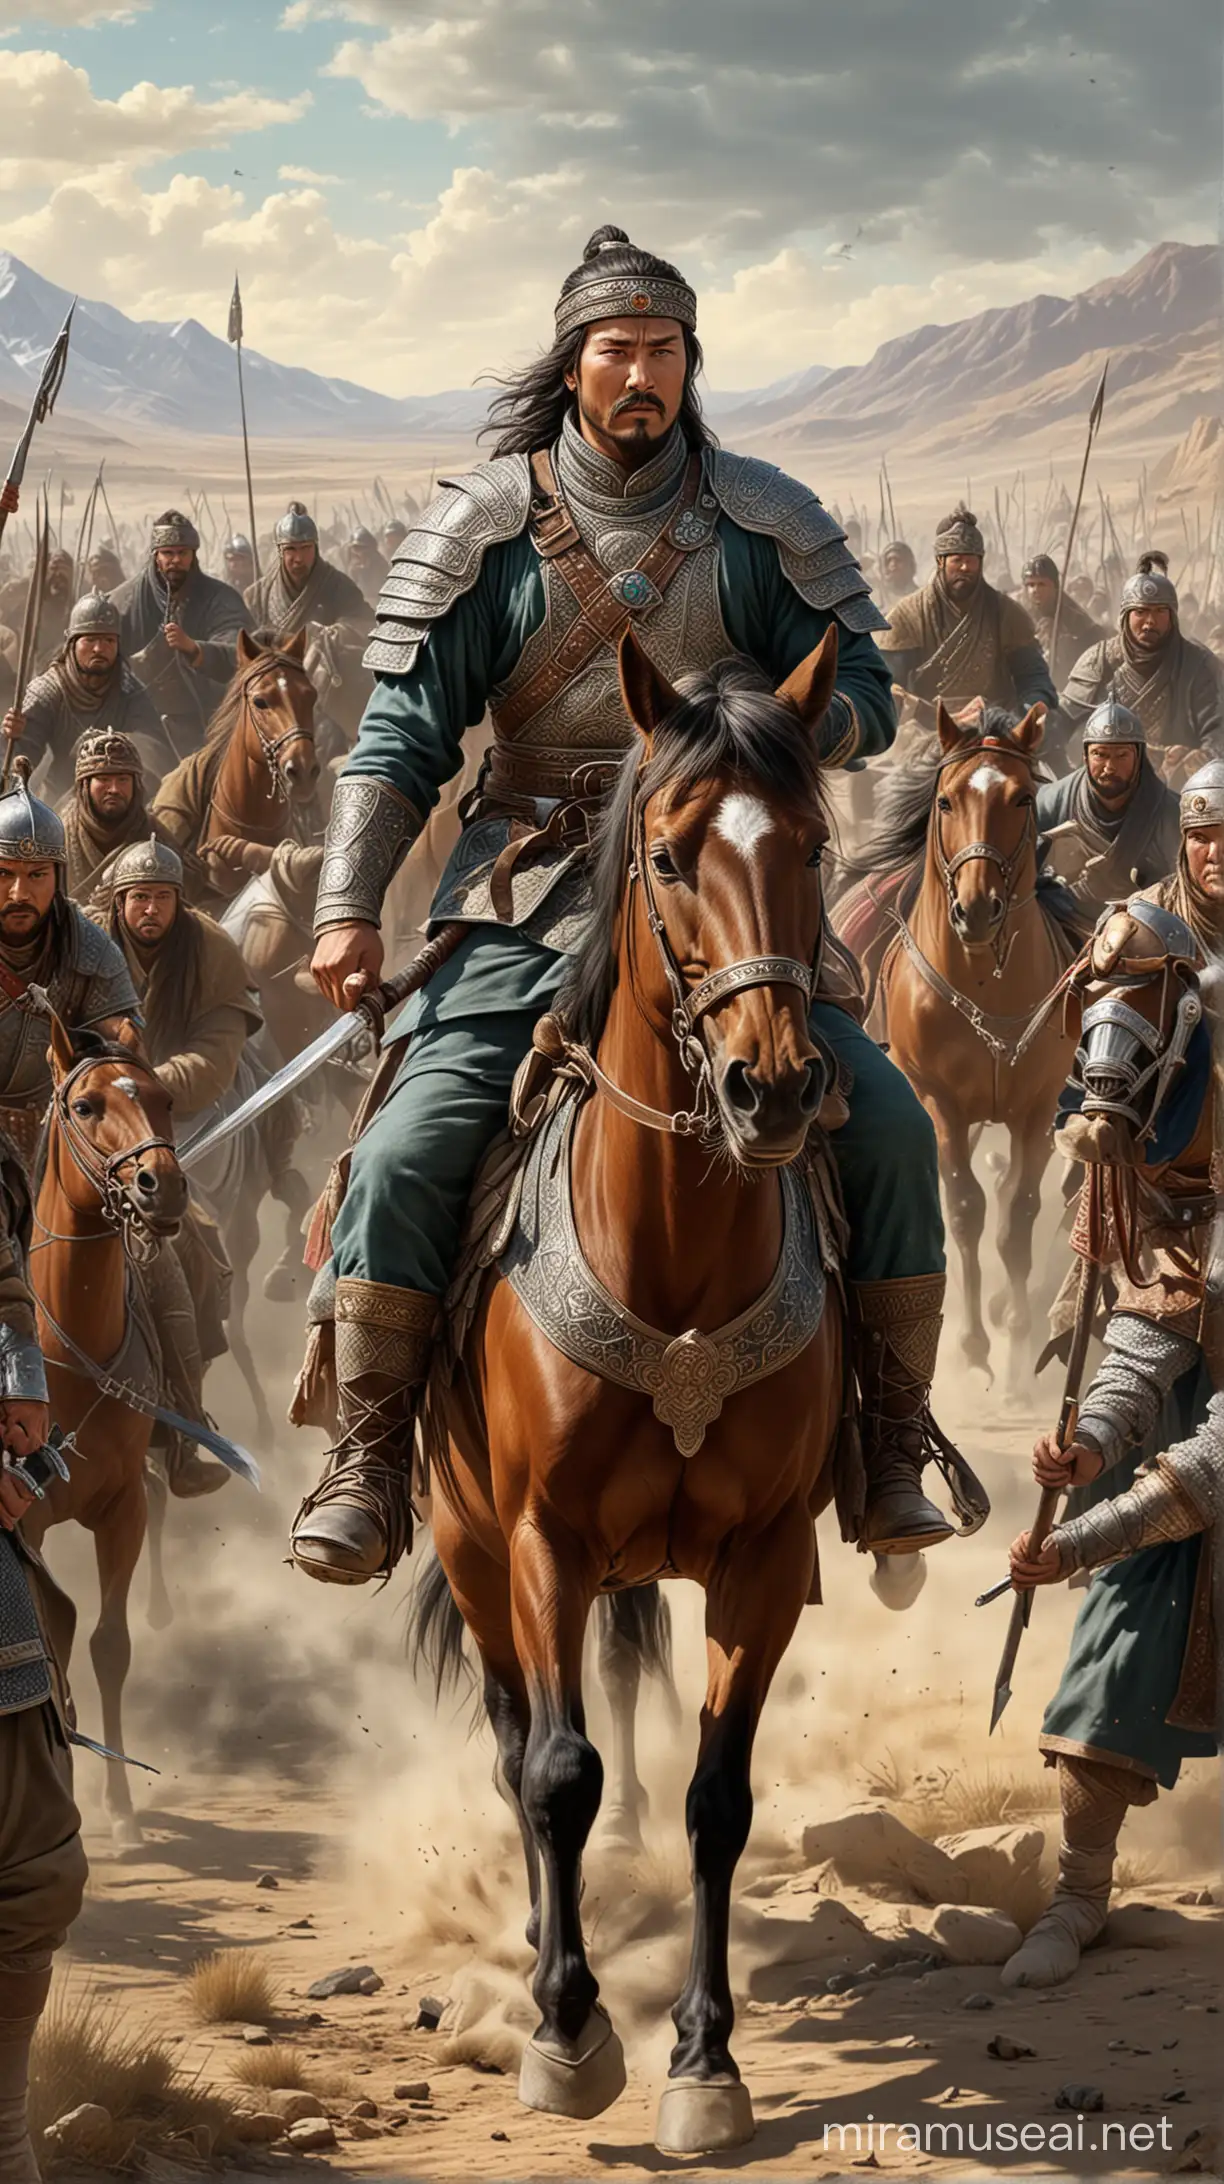 Illustration of Genghis Khan's son-in-law leading troops into battle, representing the military aspect of the marriages. hyper realistic